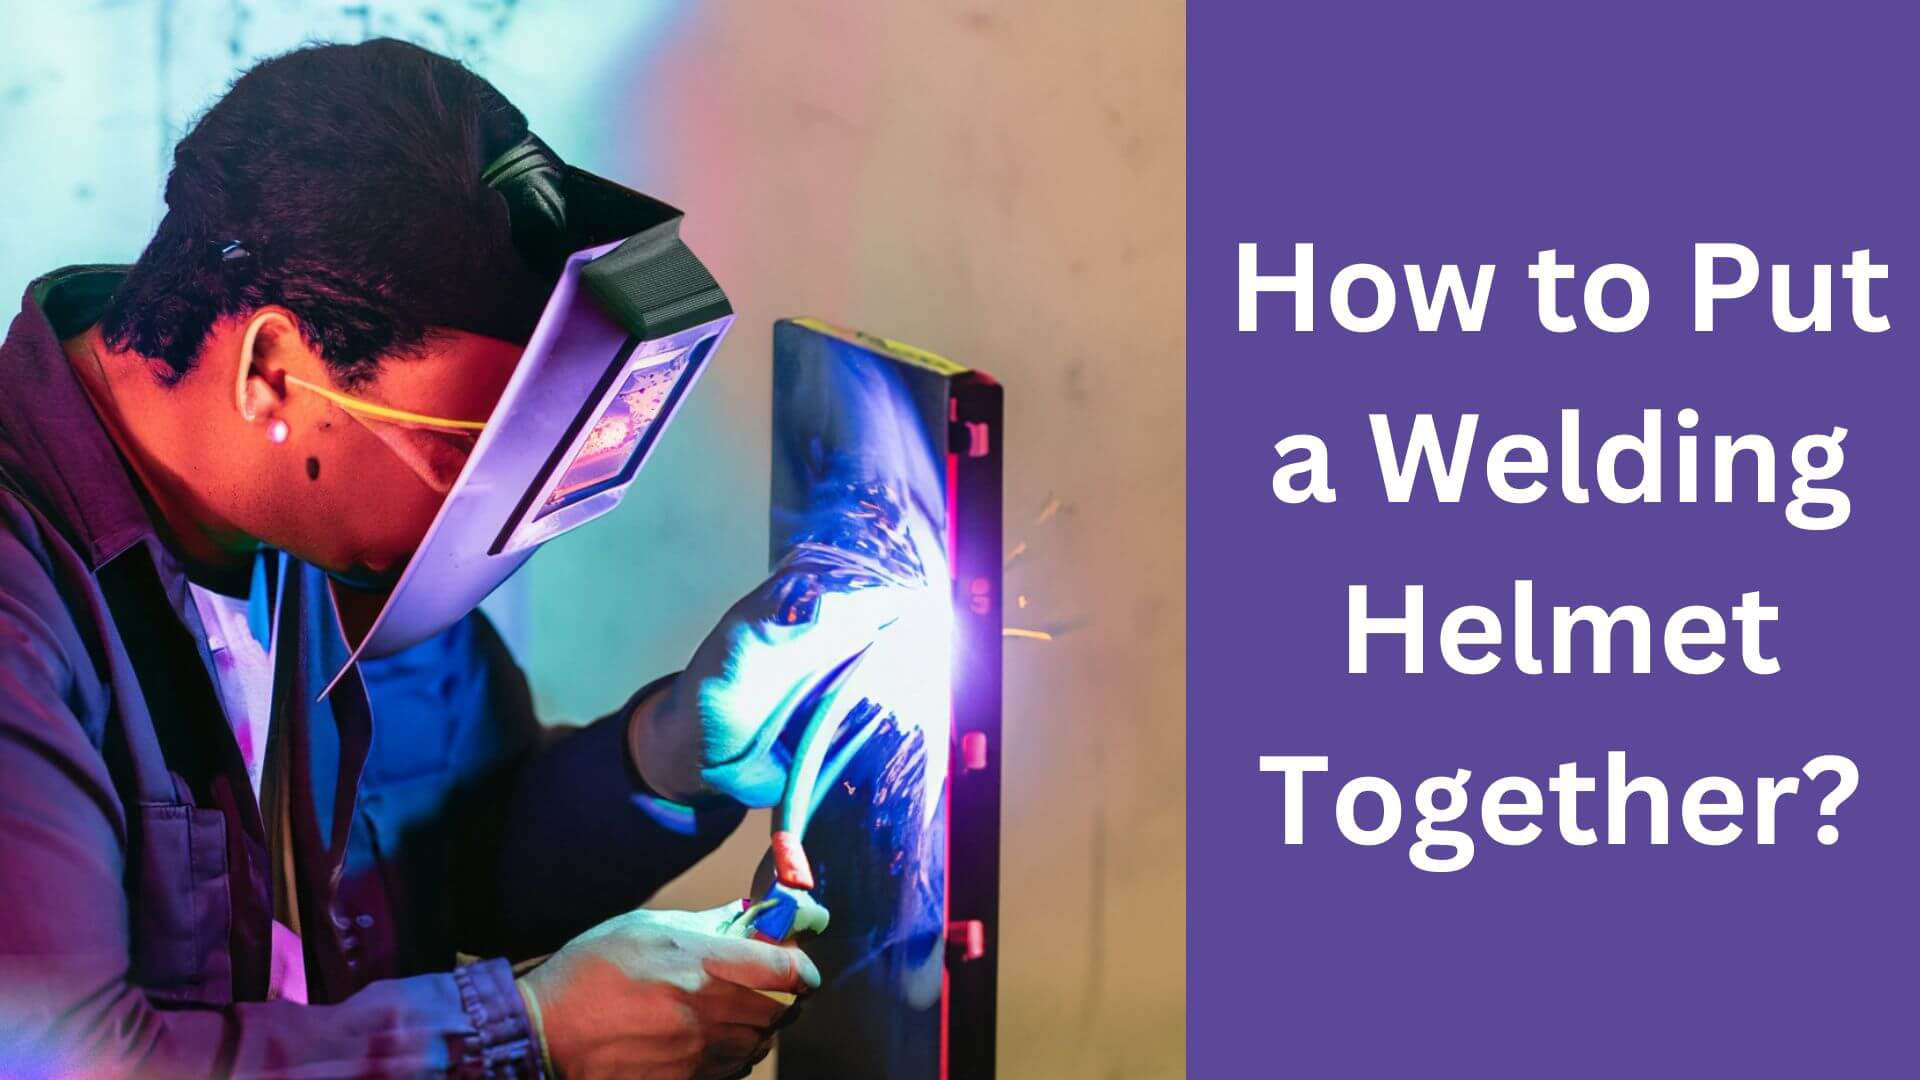 How to Put a Welding Helmet Together?